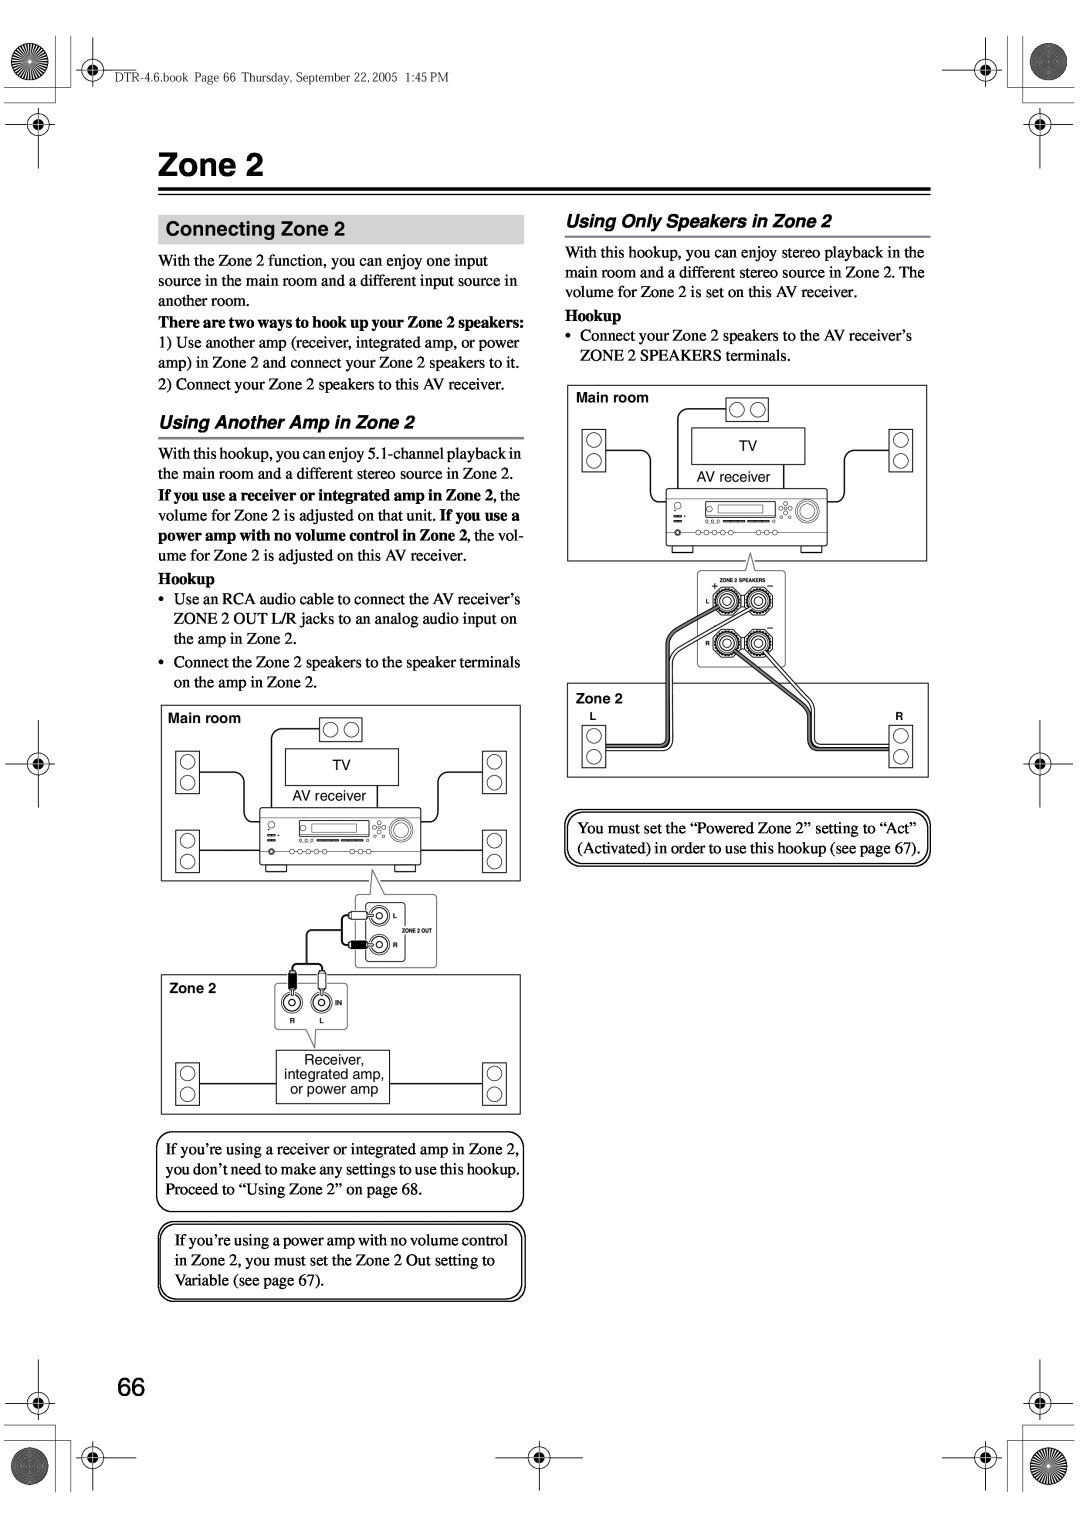 Integra DTR-4.6 instruction manual Connecting Zone, Using Another Amp in Zone, Using Only Speakers in Zone, Hookup 